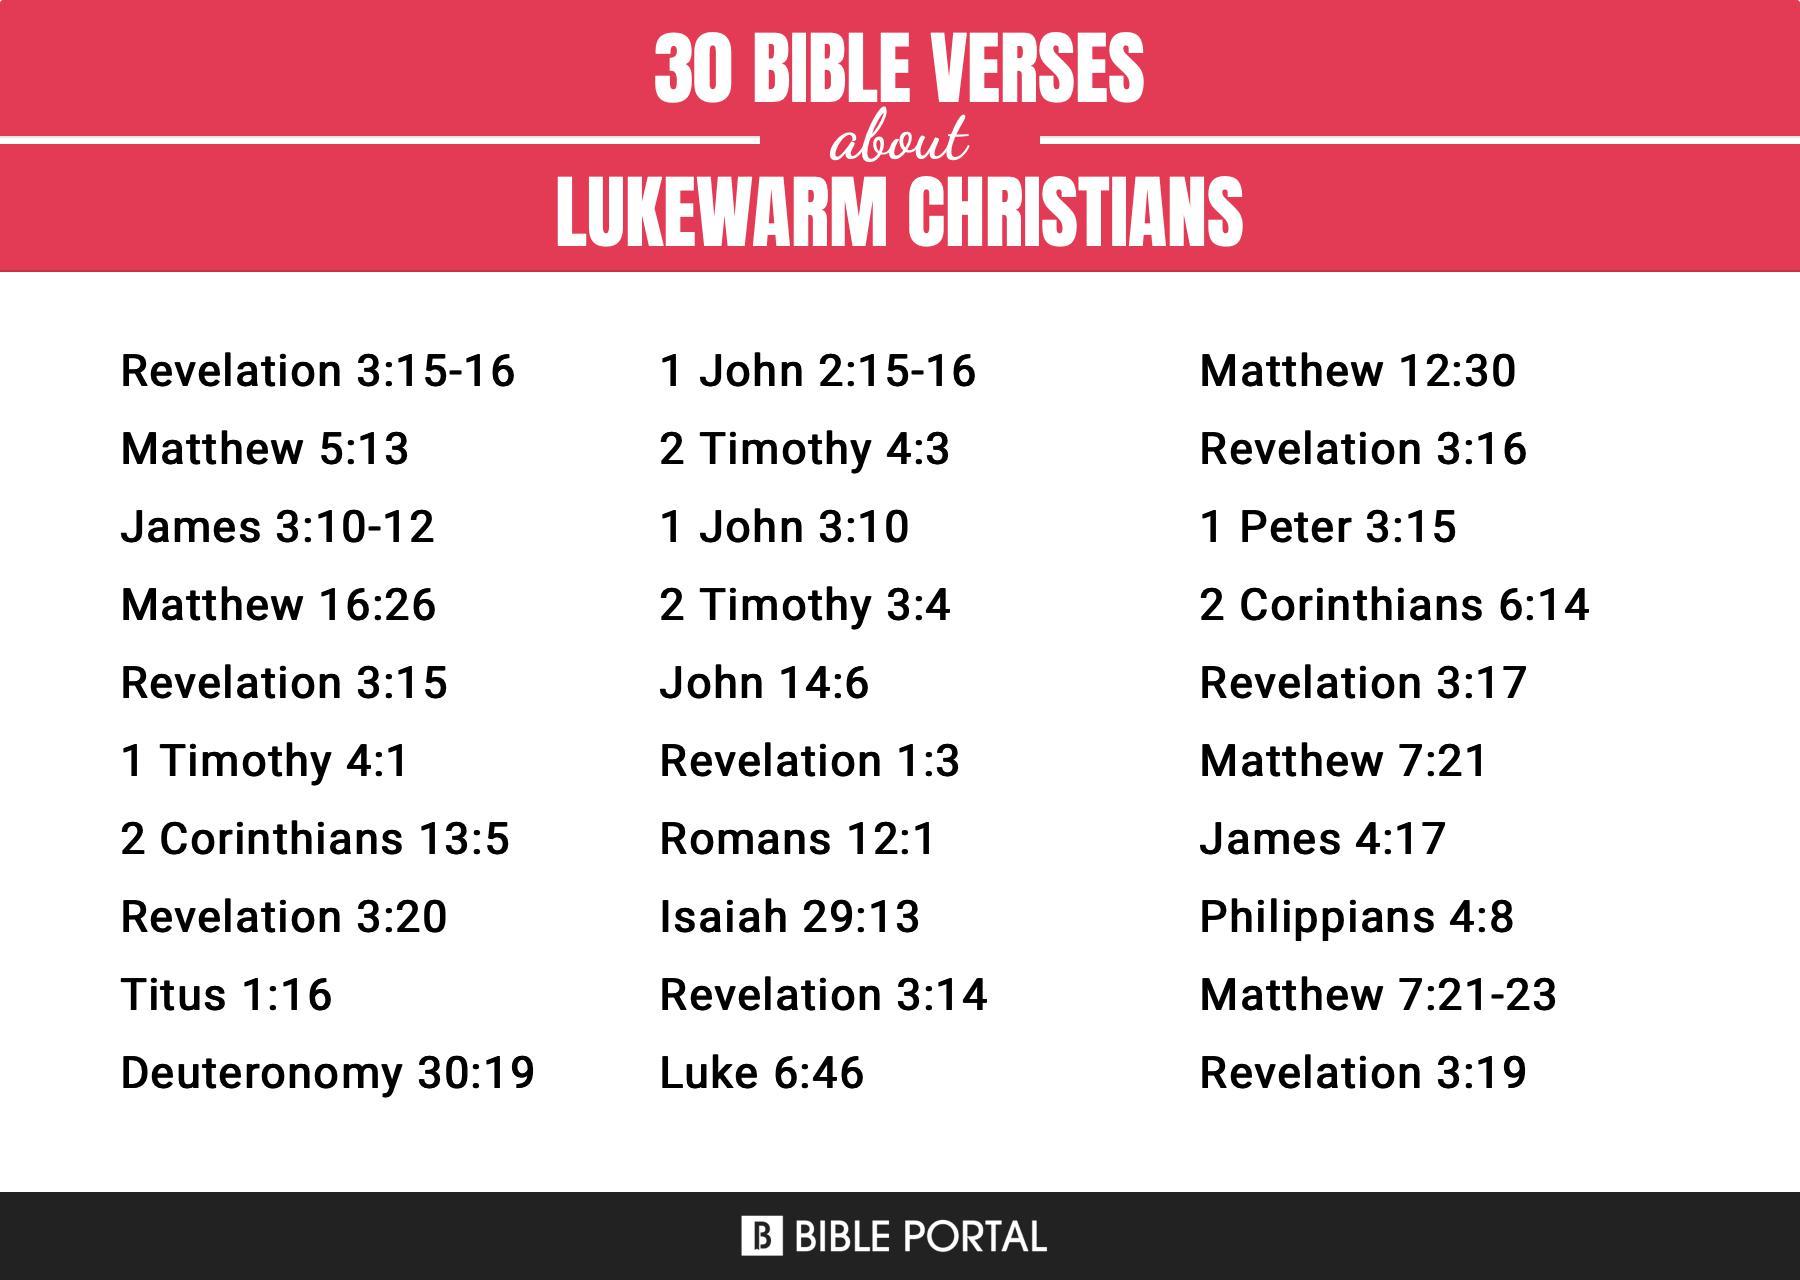 What Does the Bible Say about Lukewarm Christians?